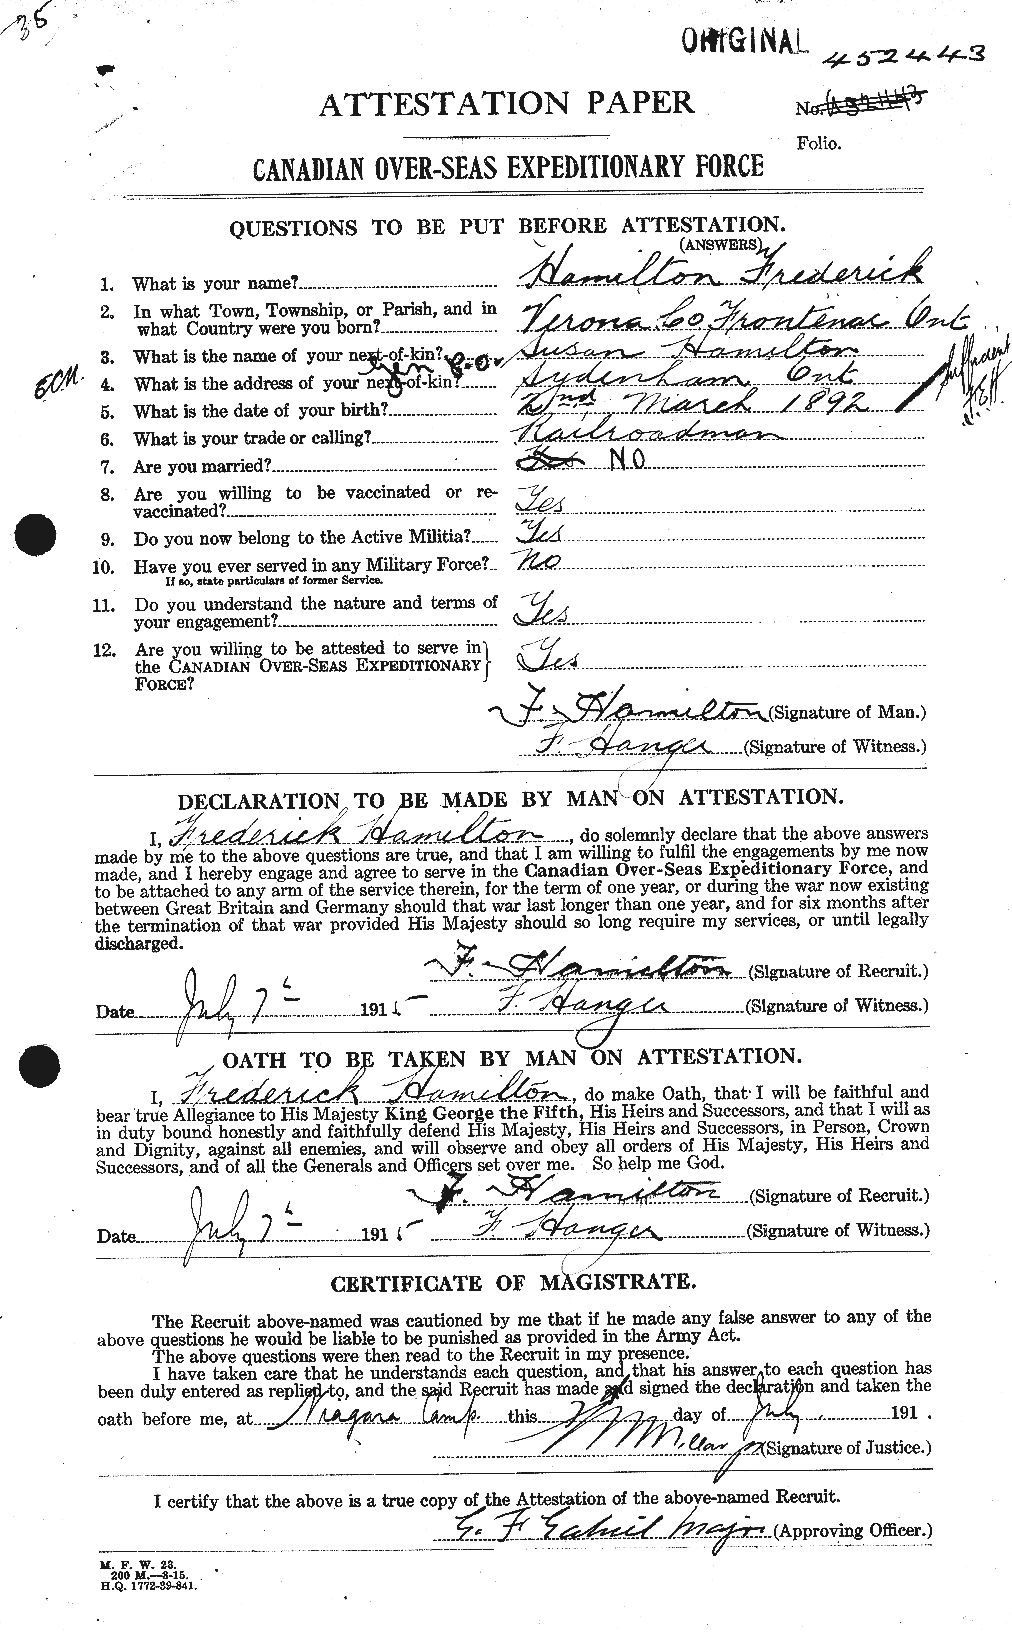 Personnel Records of the First World War - CEF 372401a